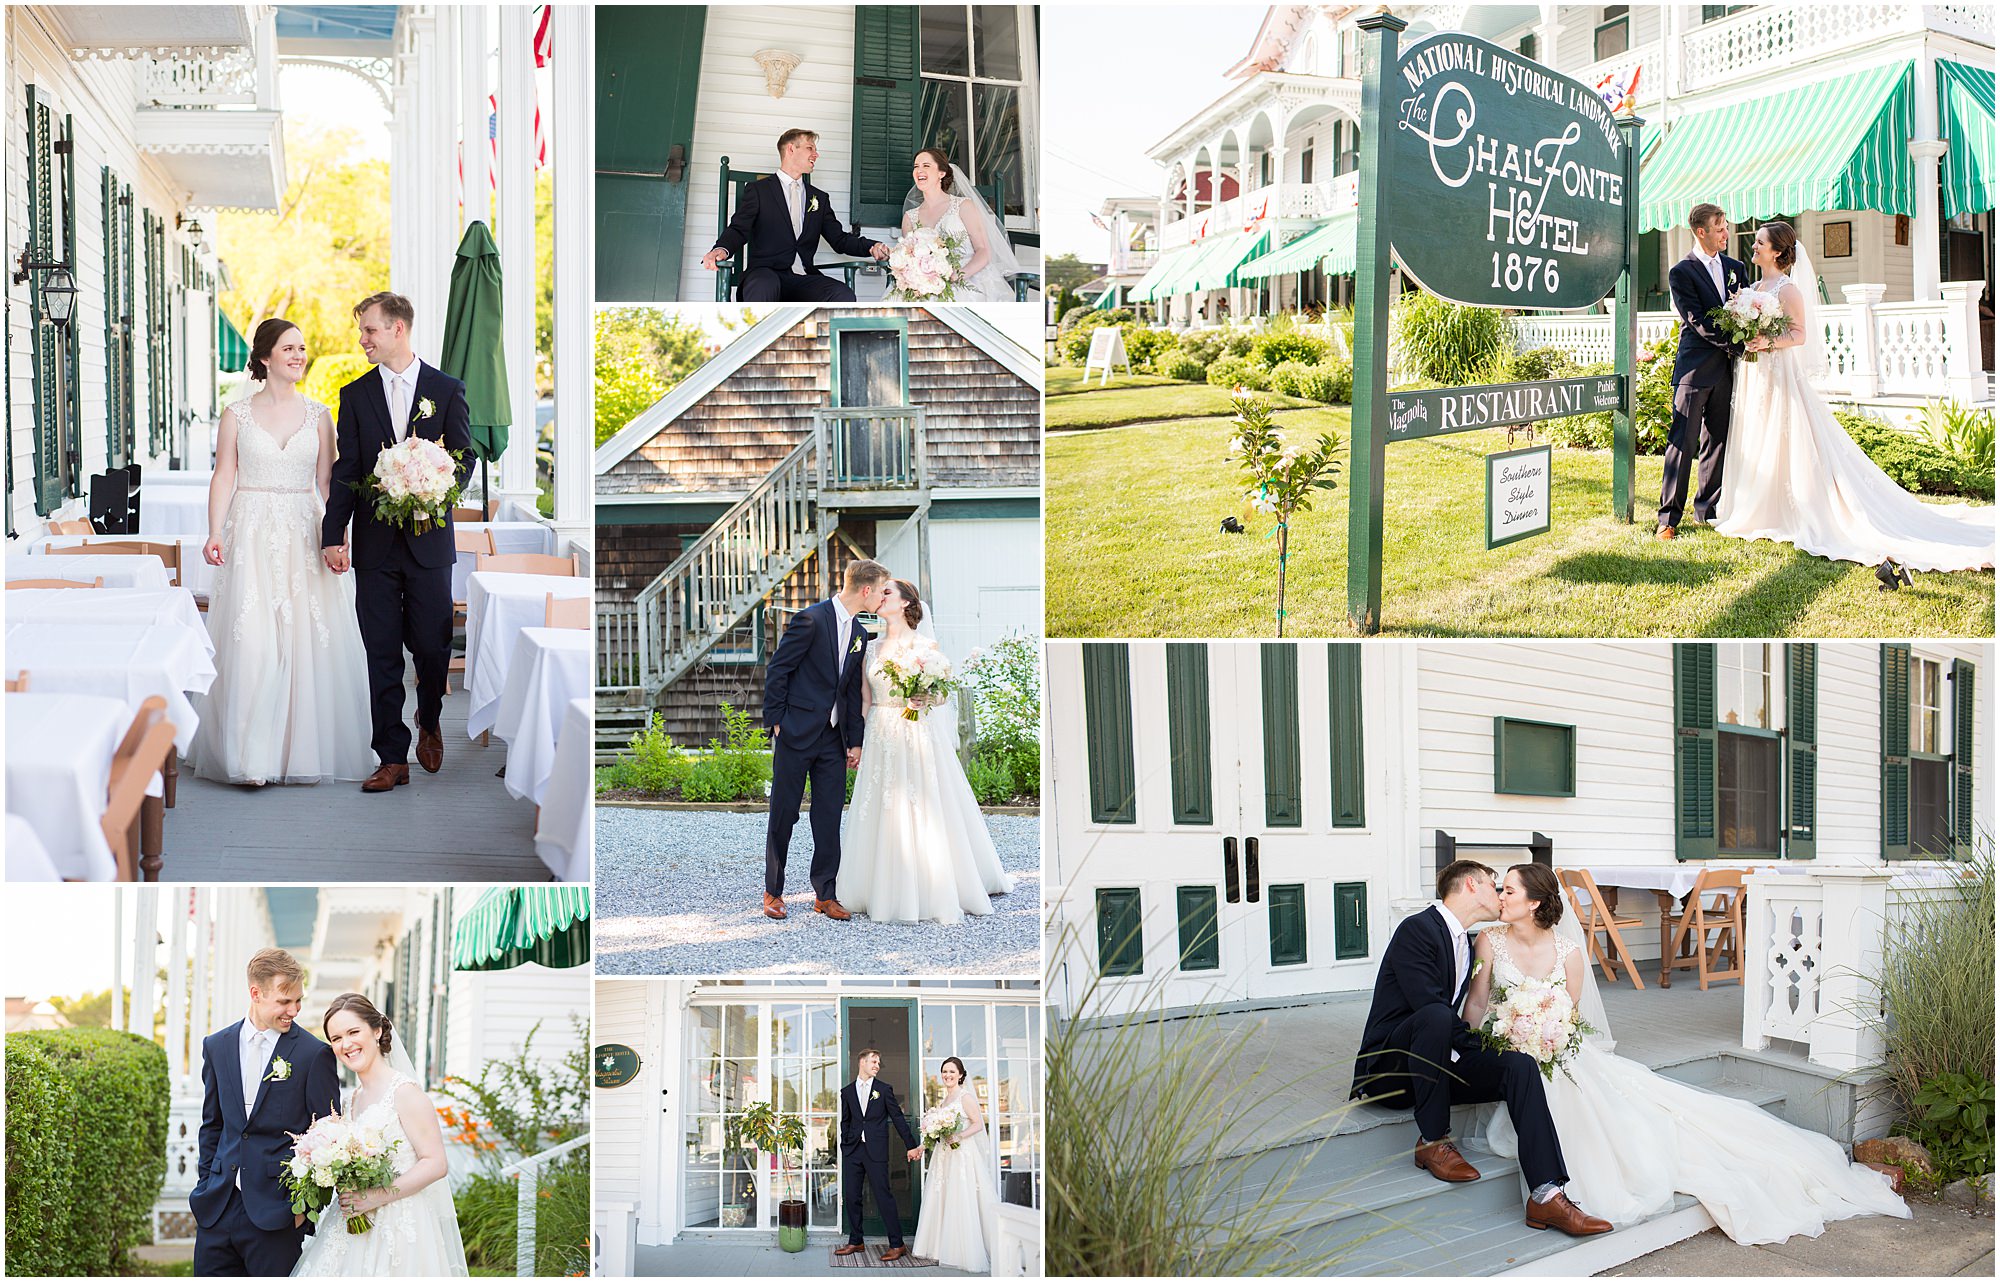 Best Wedding Venues in Cape May: The Chalfonte Hotel Couple Portraits